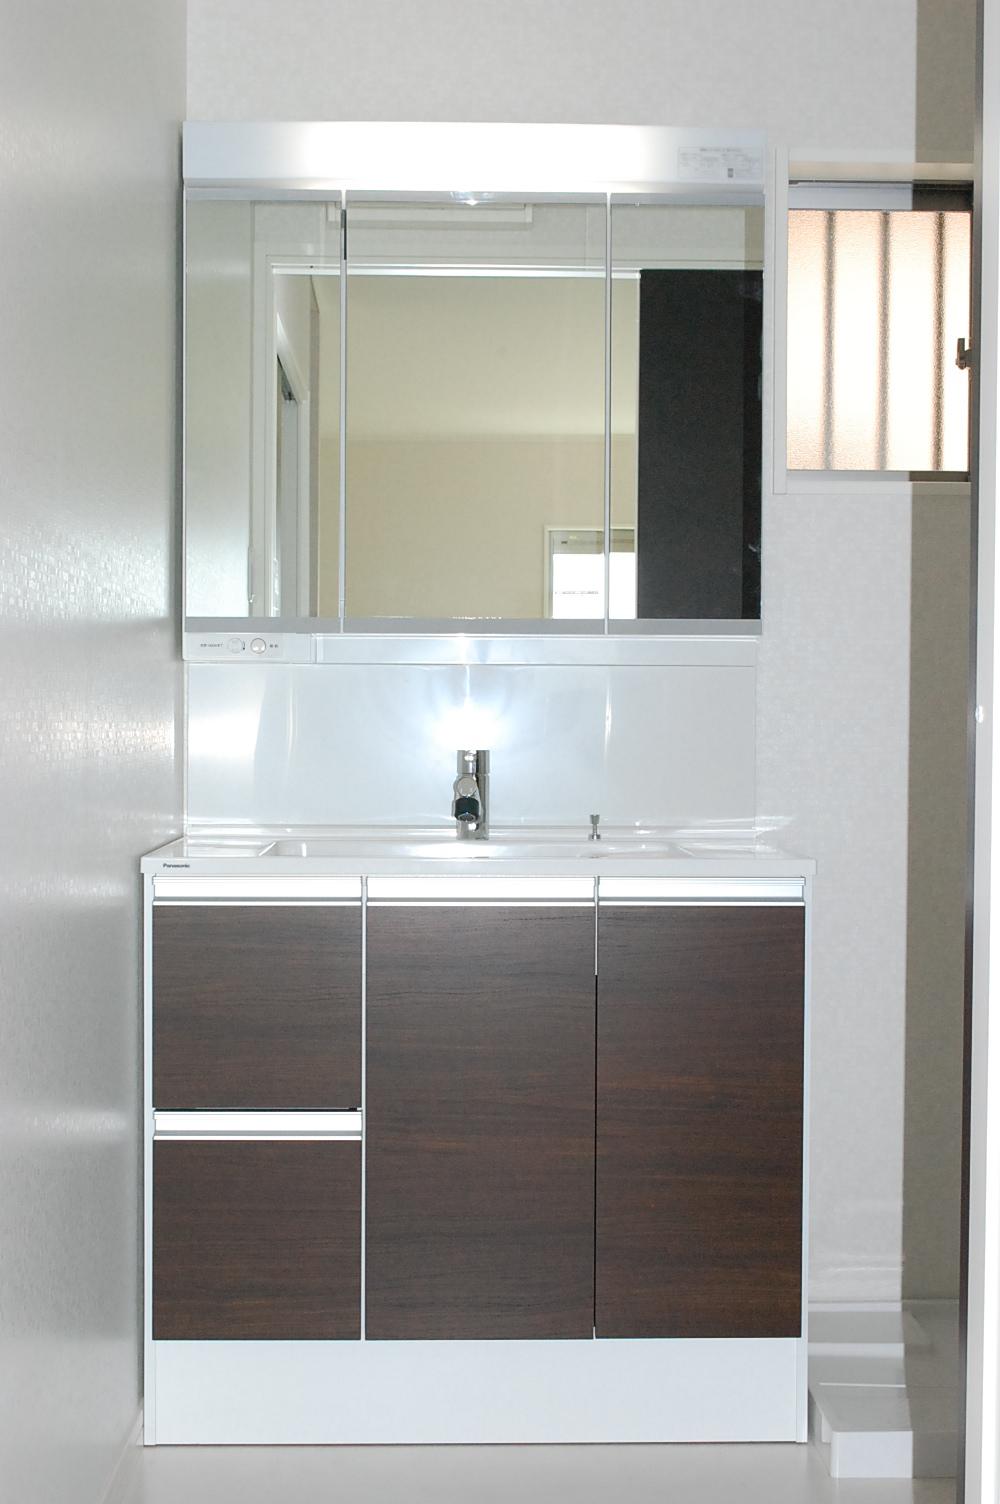 Wash basin, toilet. Three-sided mirror type of Panasonic ・ Dresser with a wide shower.